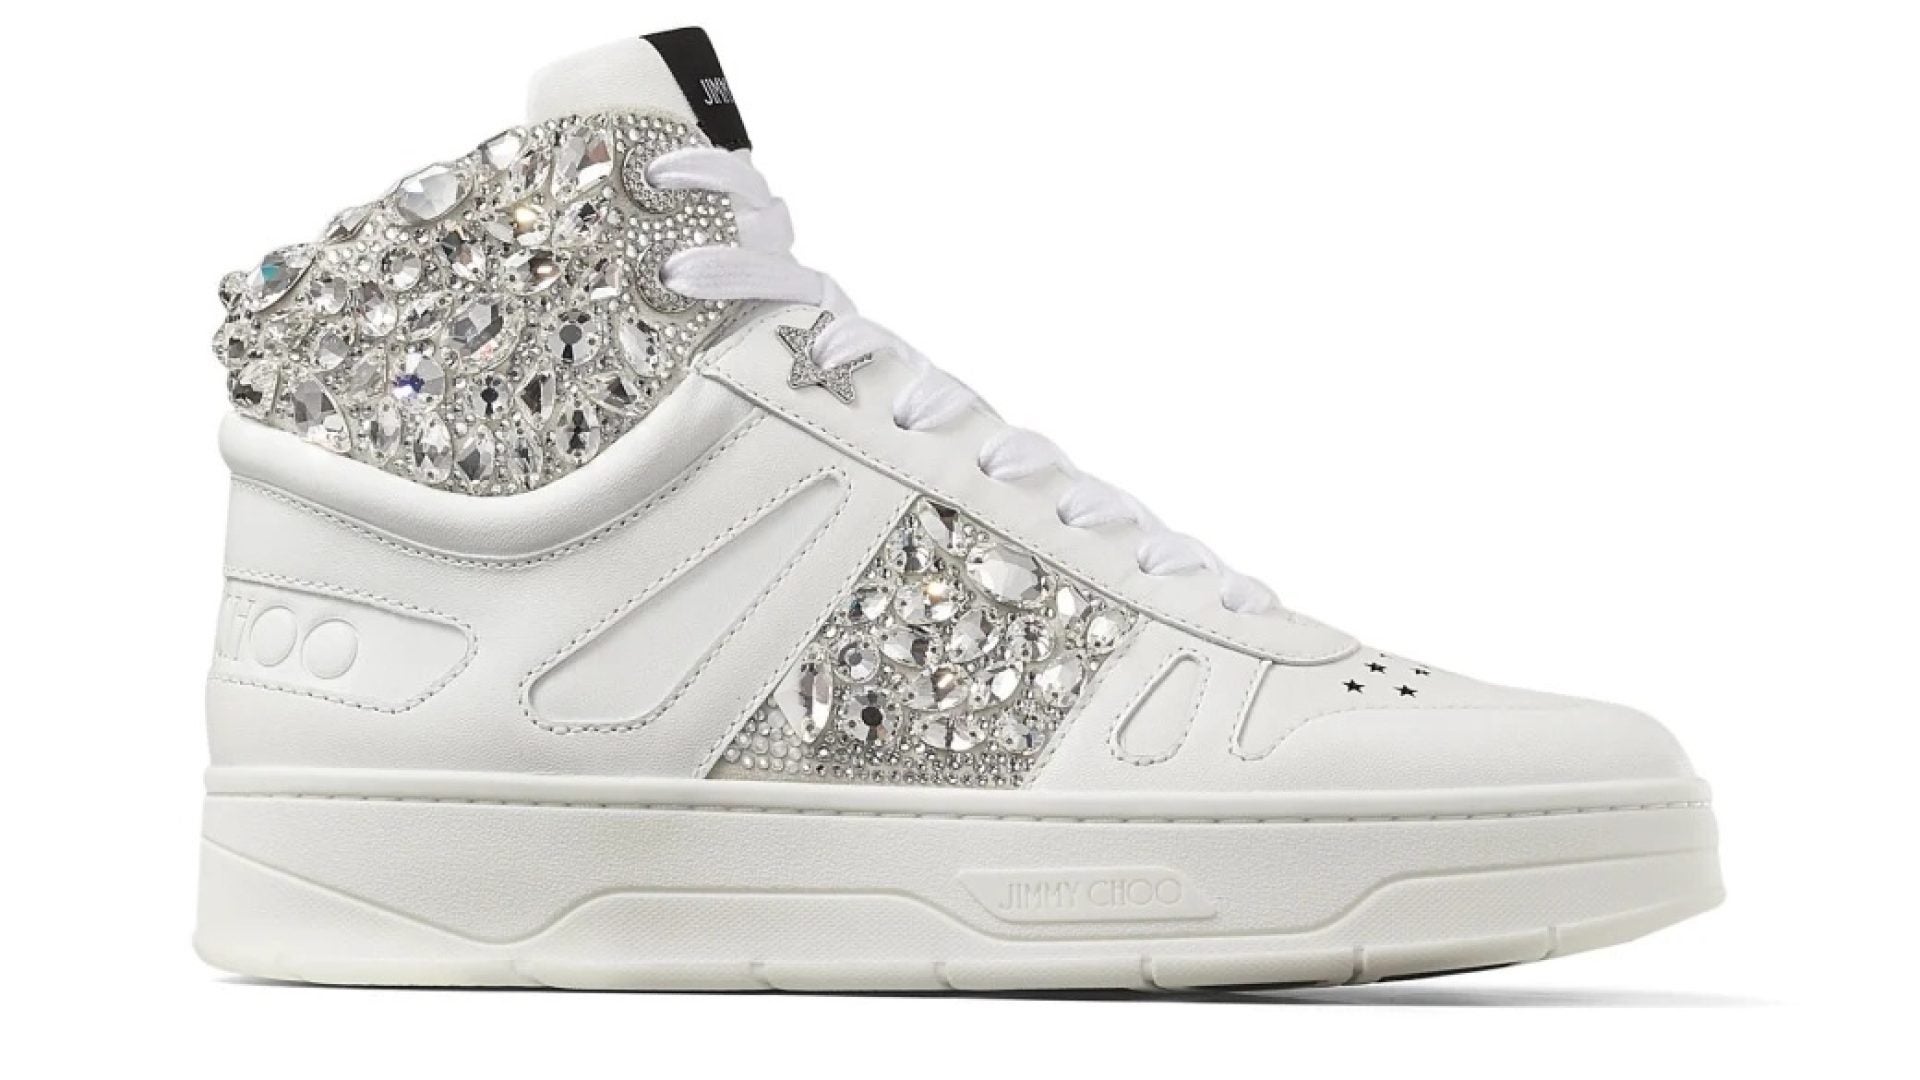 Attention Sneakerheads: Step Into Spring With The Latest Luxury Kicks